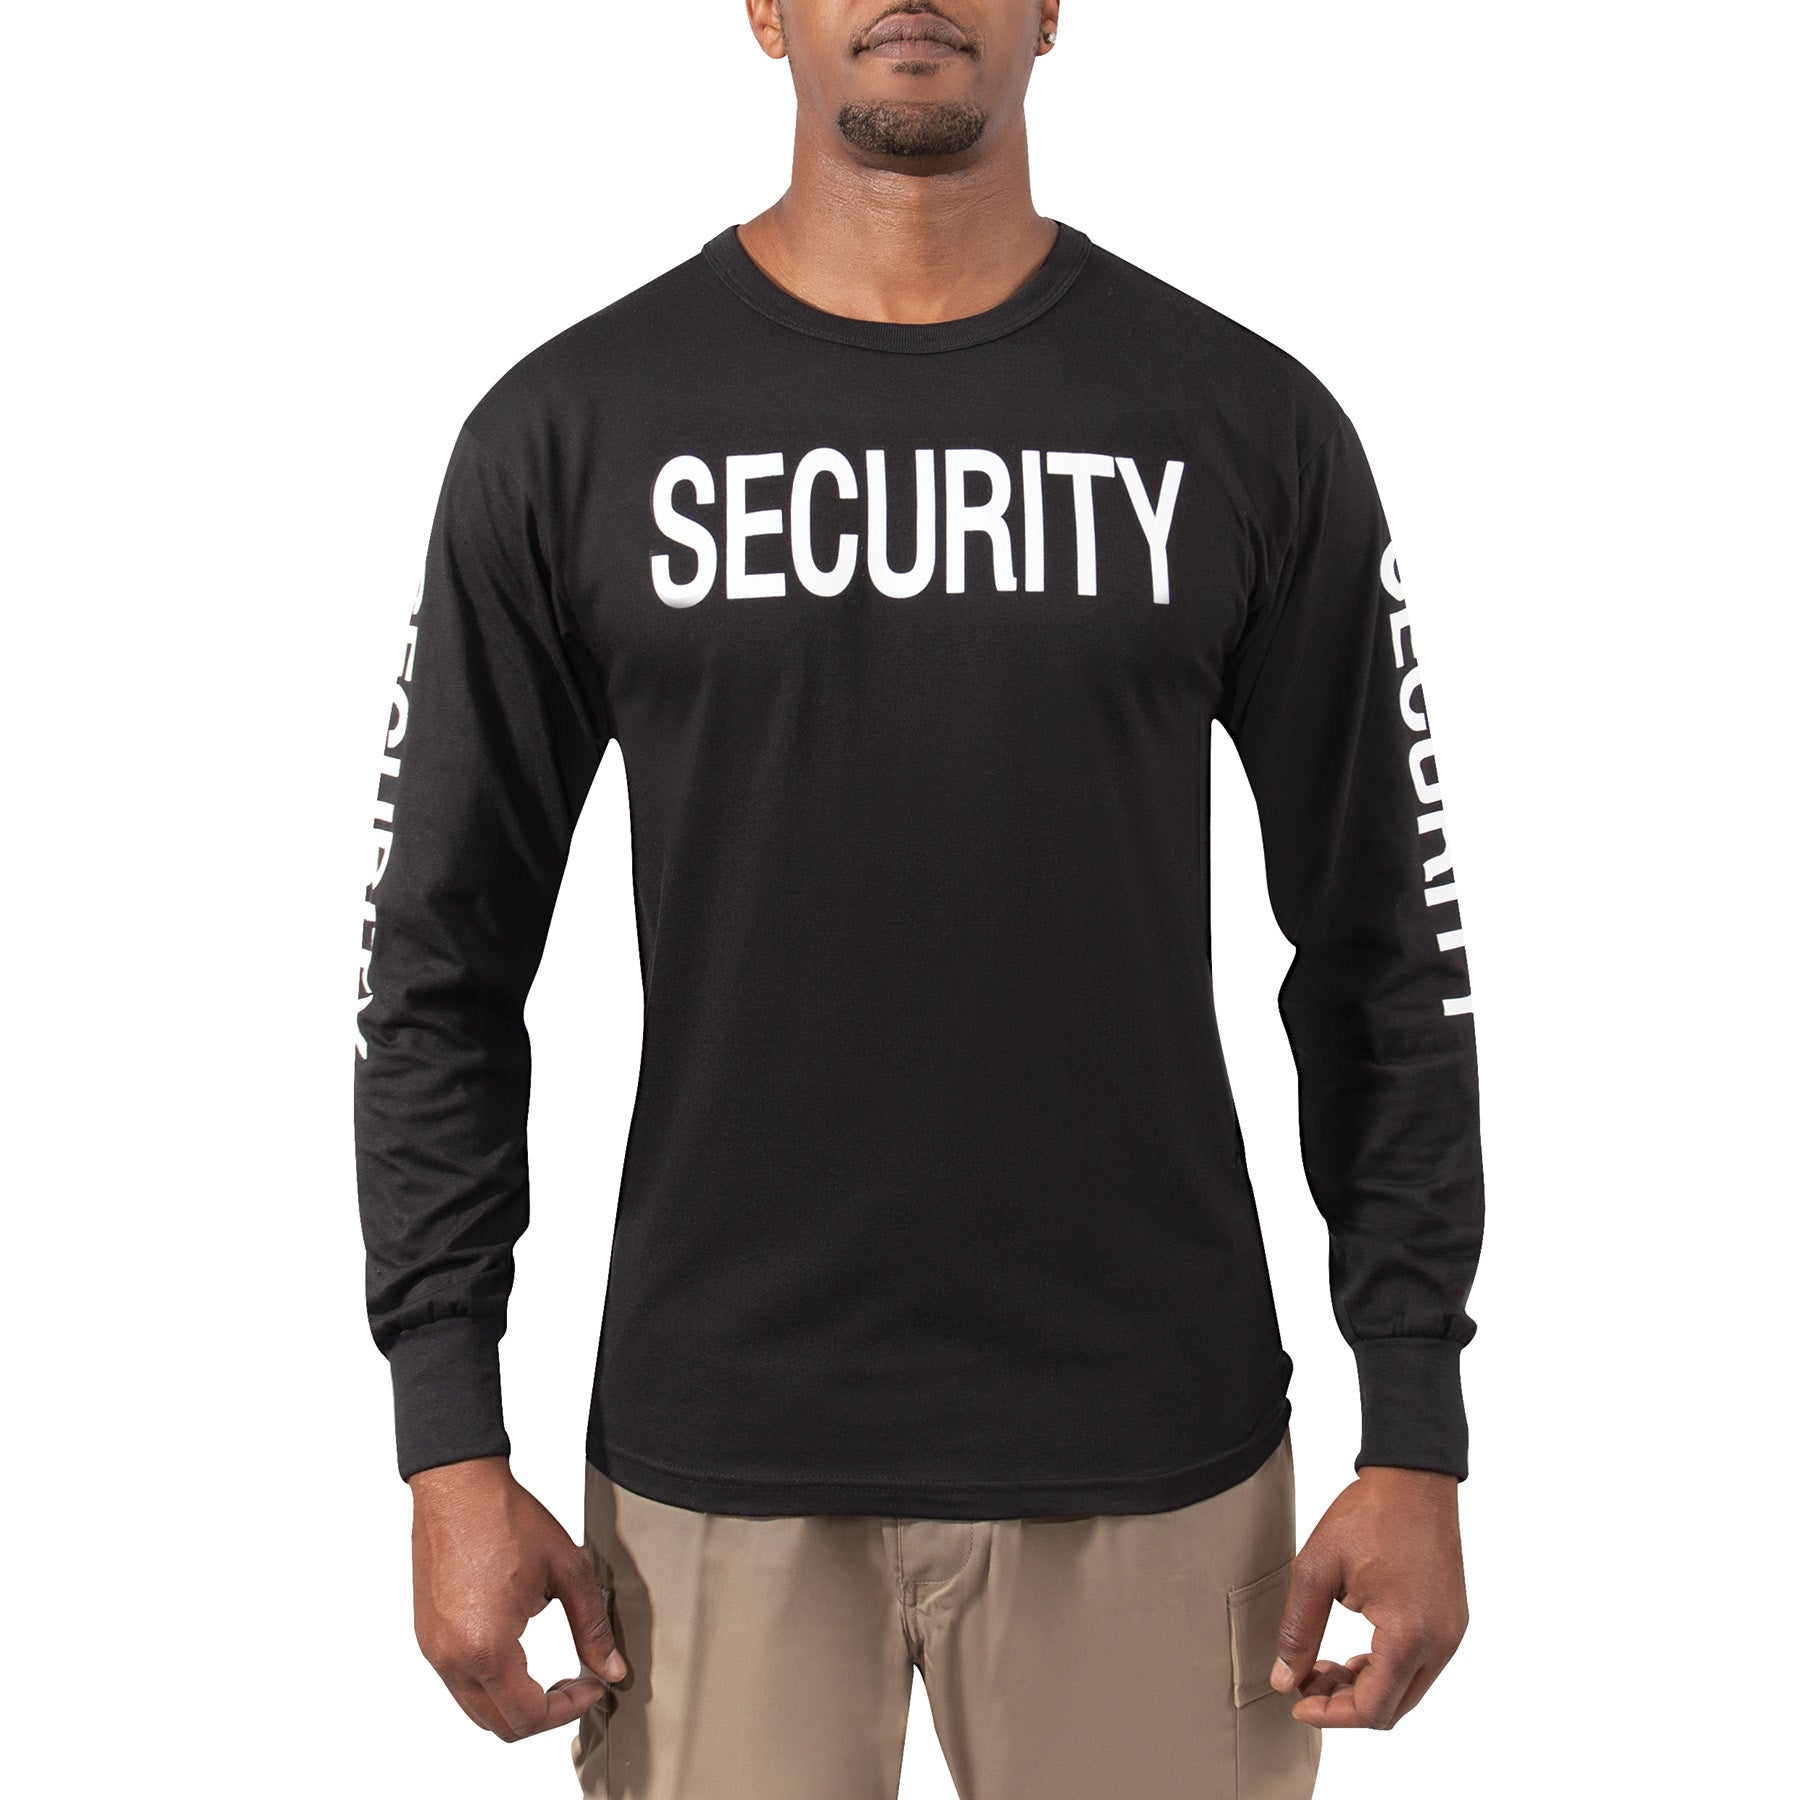 [Public Safety] Poly/Cotton 2-Sided Security & Print On Long Sleeve Shirts Security White - Black